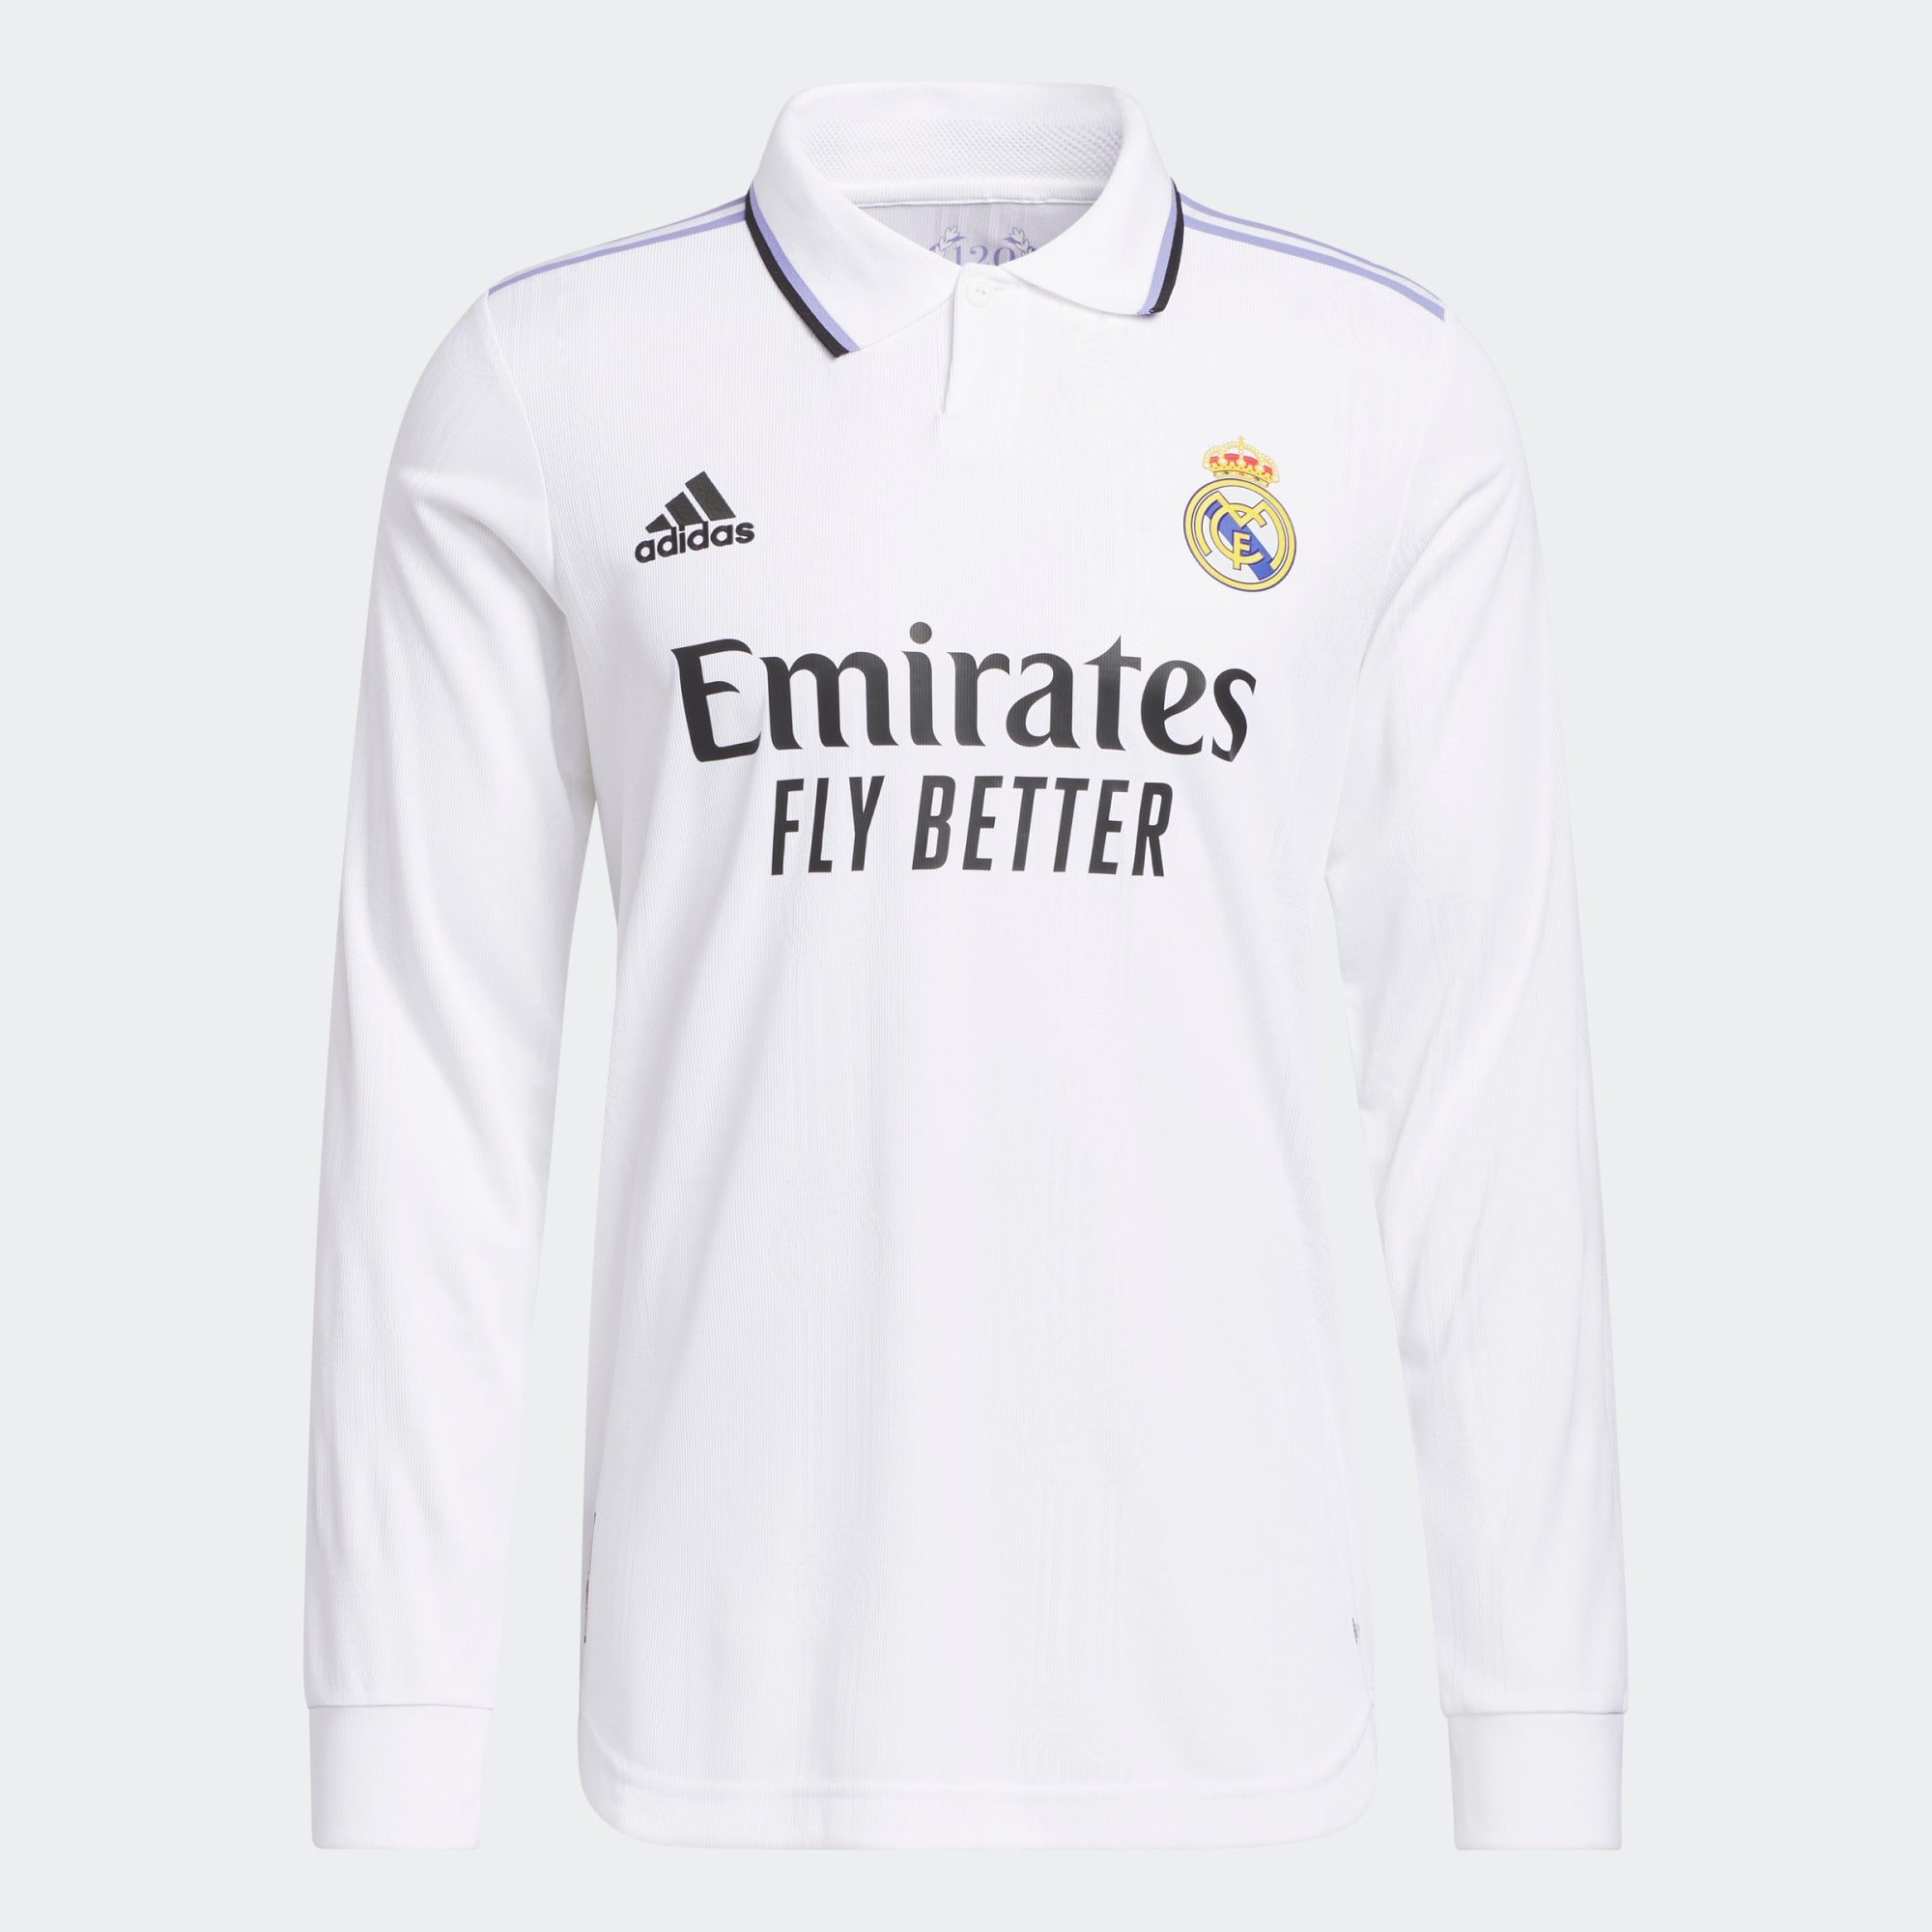 real madrid jersey near me